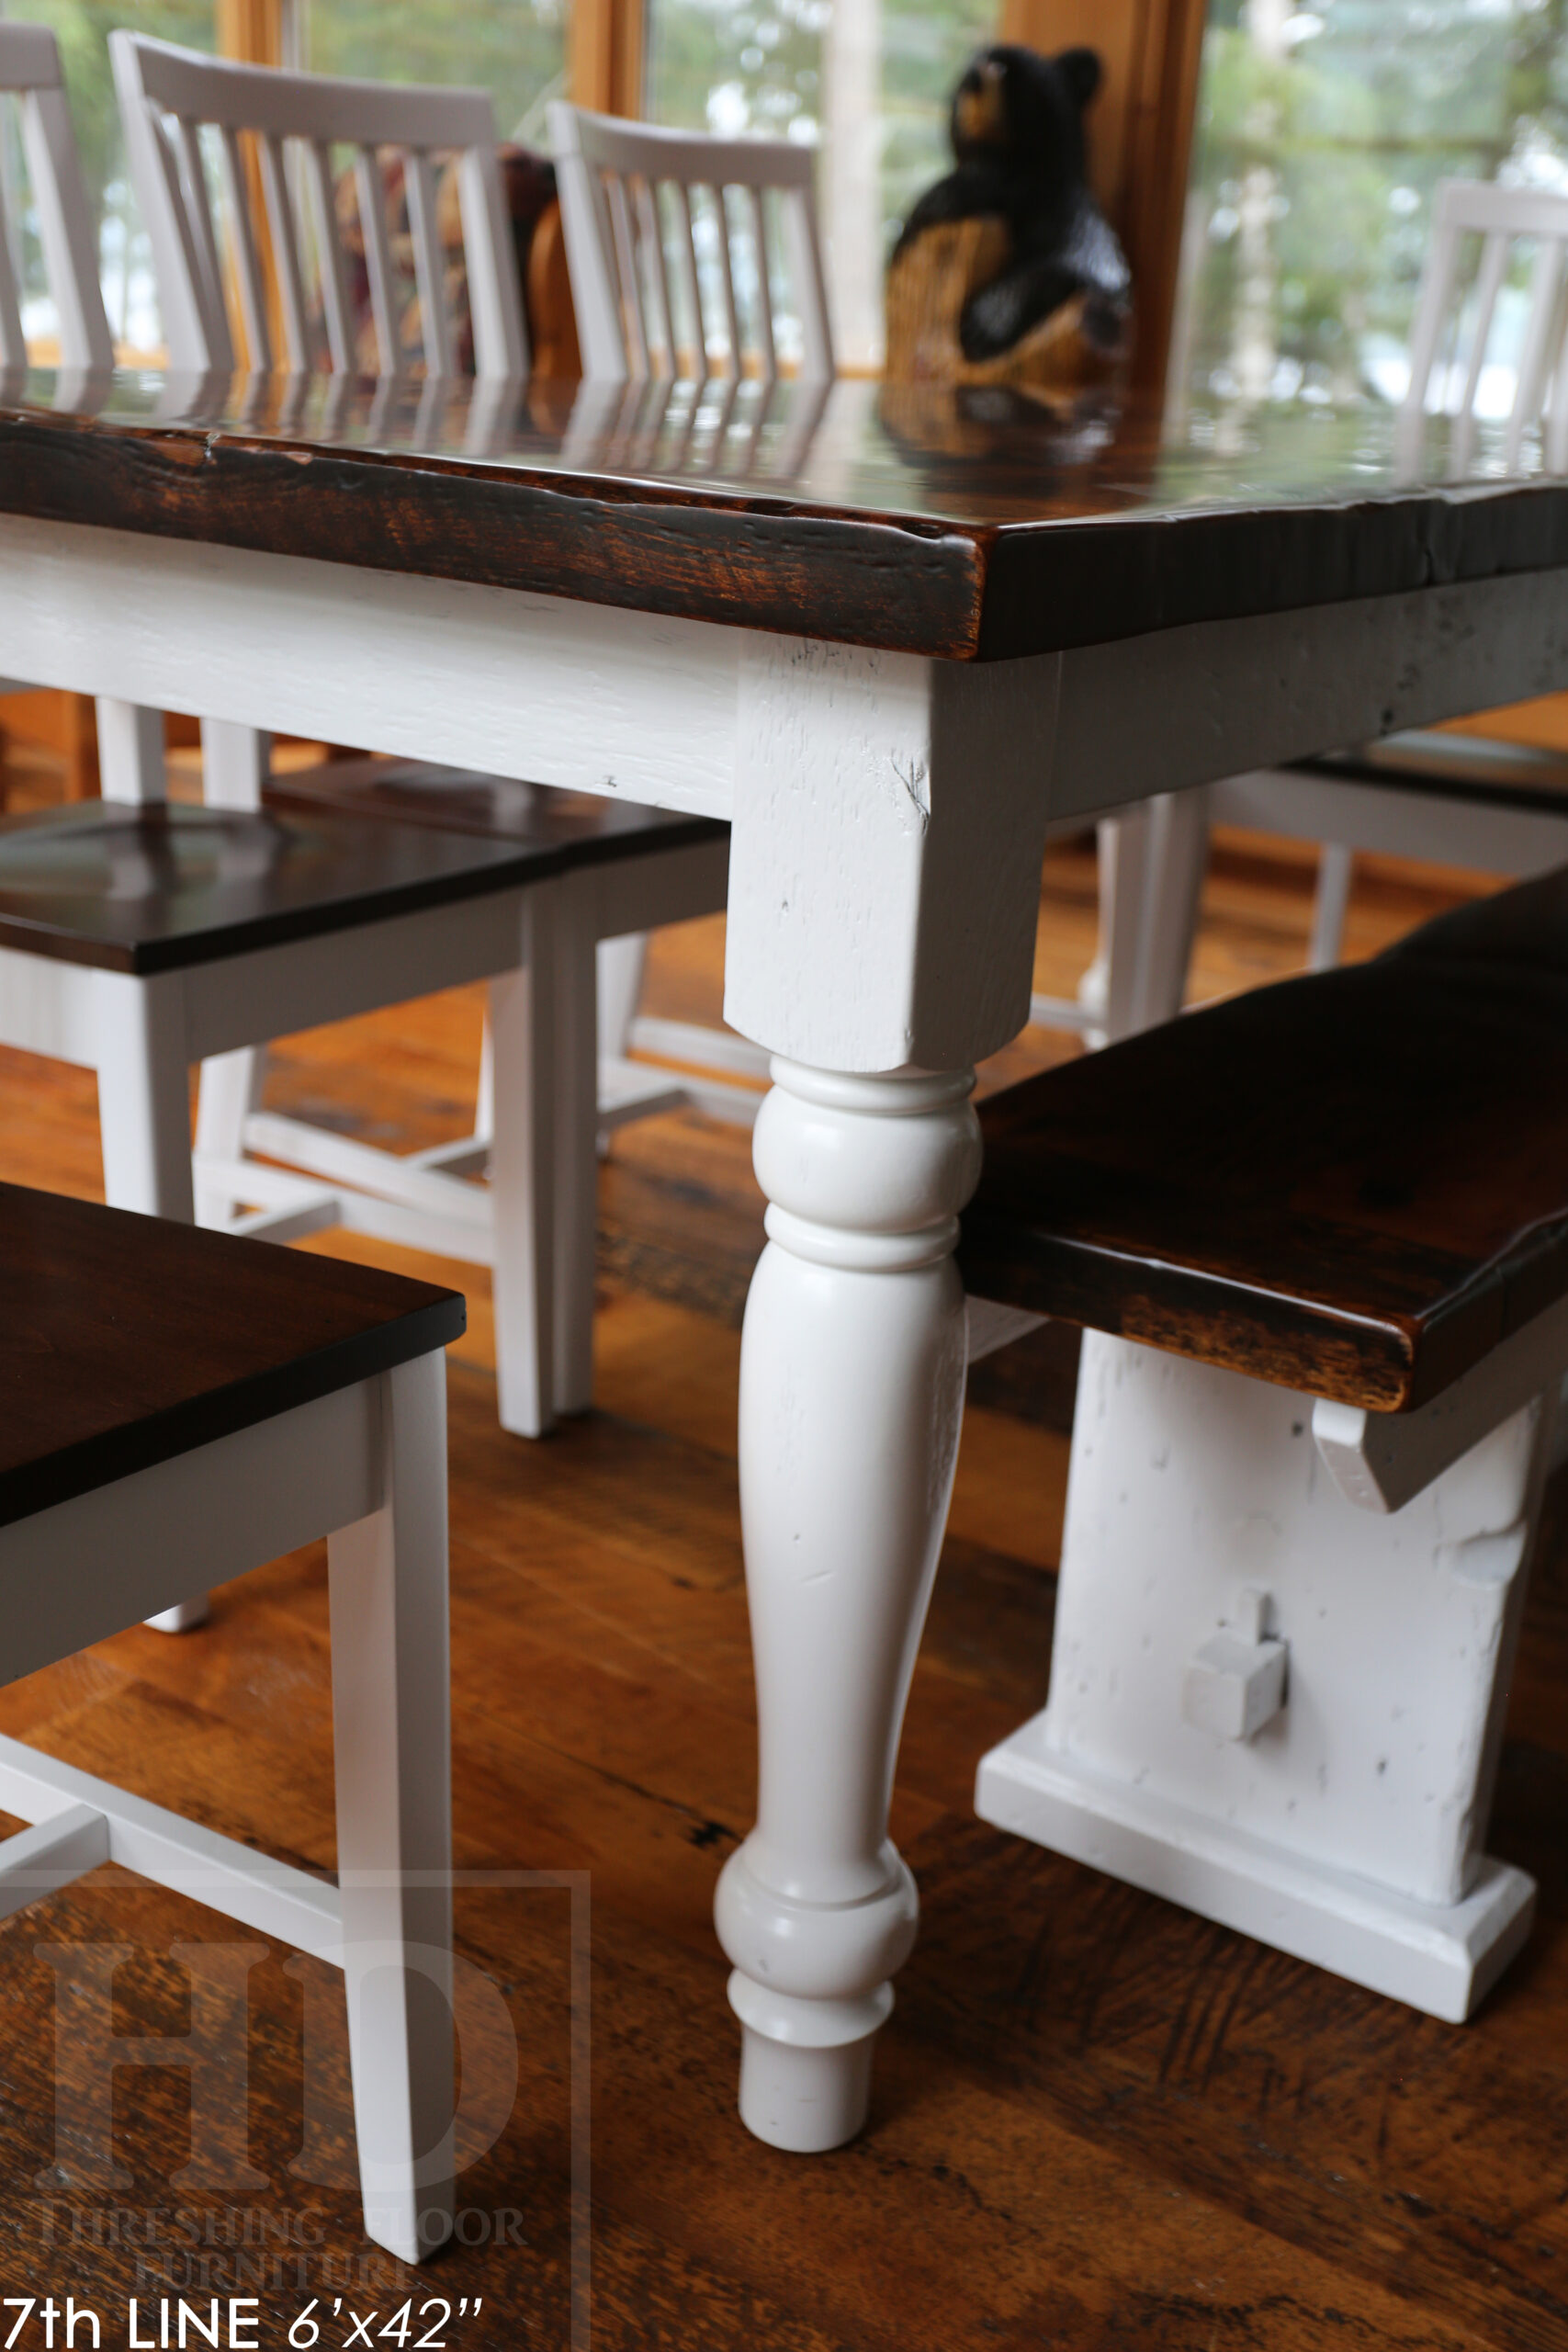 Details: 6' Reclaimed Wood Table we made for an Ontario cottage - 42" wide - Harvest Base - Turned Windbrace Beam Legs [painted white] - Old Growth Hemlock Threshing Floor Construction - Original edges & distressing maintained - Premium epoxy + satin polyurethane finish - 5' Trestle Bench - 5 Hudson Chairs / Wormy Maple / White Frame + Seat stained colour of table - www.table.ca